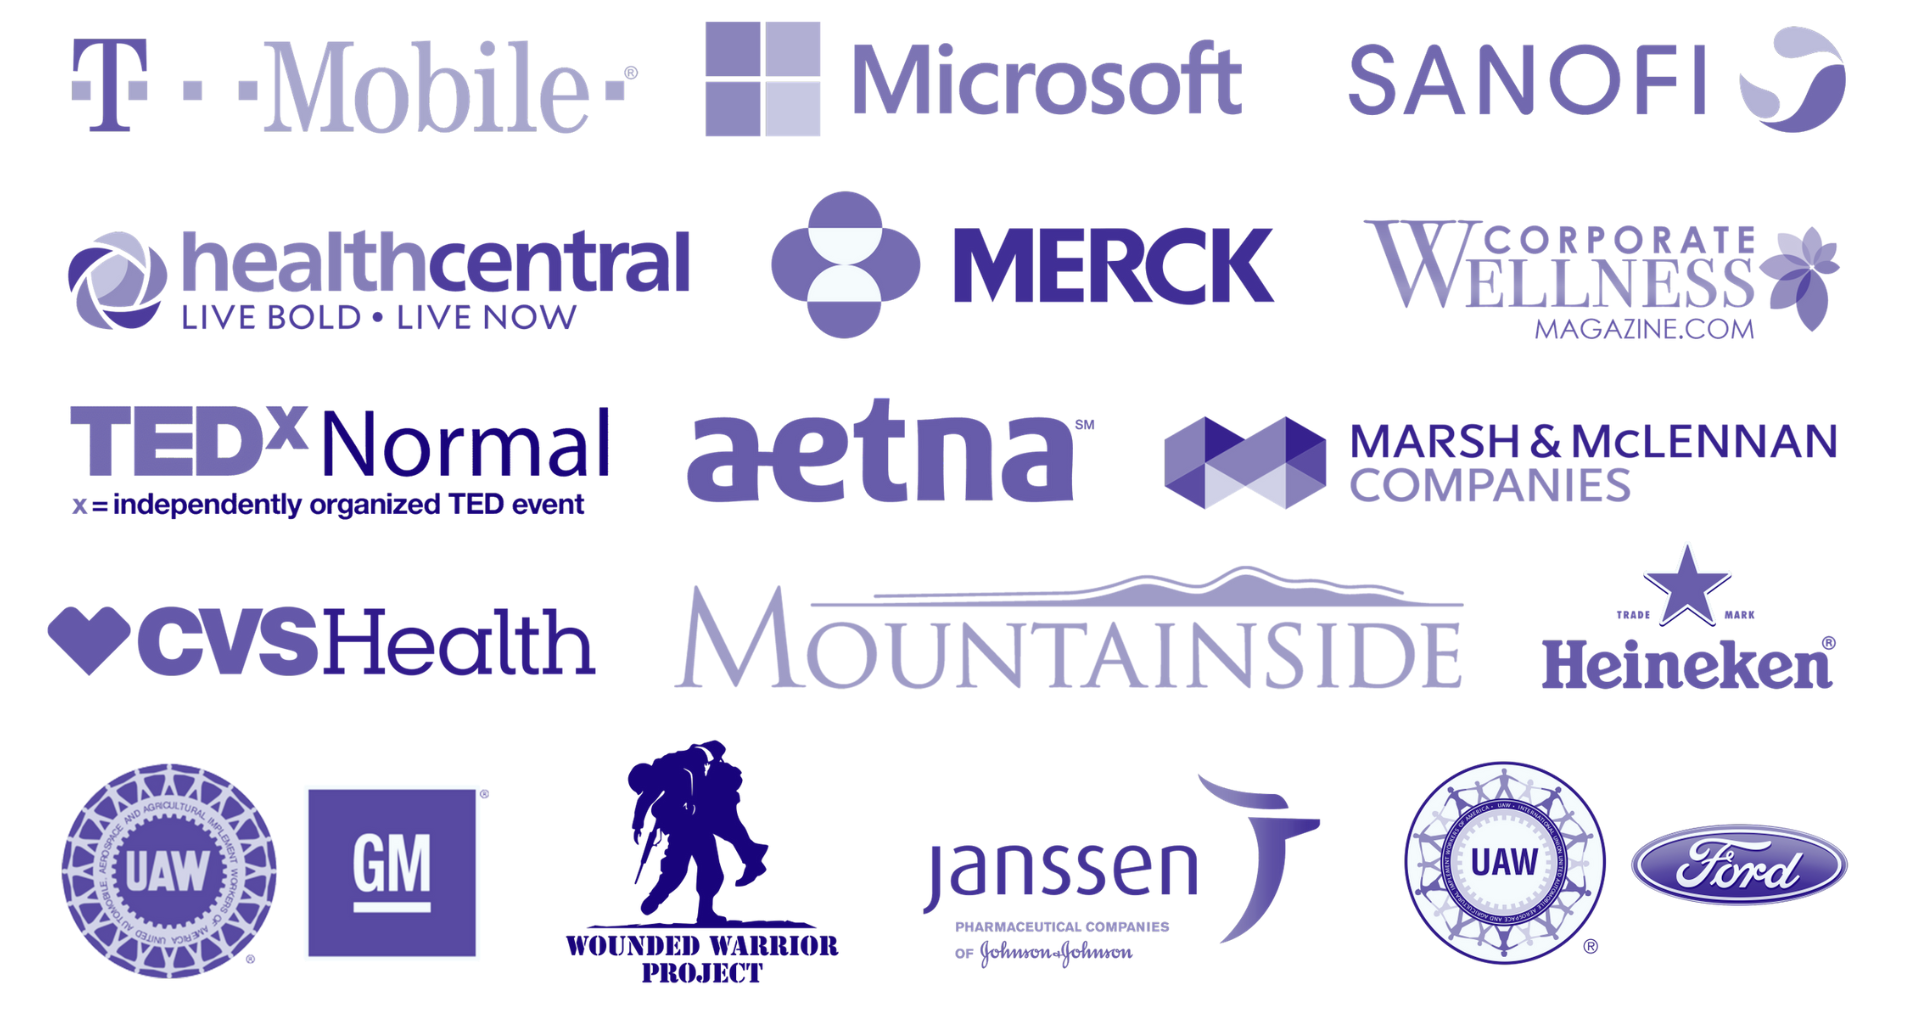 T-Mobile, Microsoft, Sanofi, HealthCentral, Merck, Corporate Wellness Magazine, TEDx Normal, Aetna, Marsh & McLennan, CVS, Mountainside, Heineken, United Auto Workers General Motors, Wounded Warrior Project, Janssen, and United Auto Workers Ford.